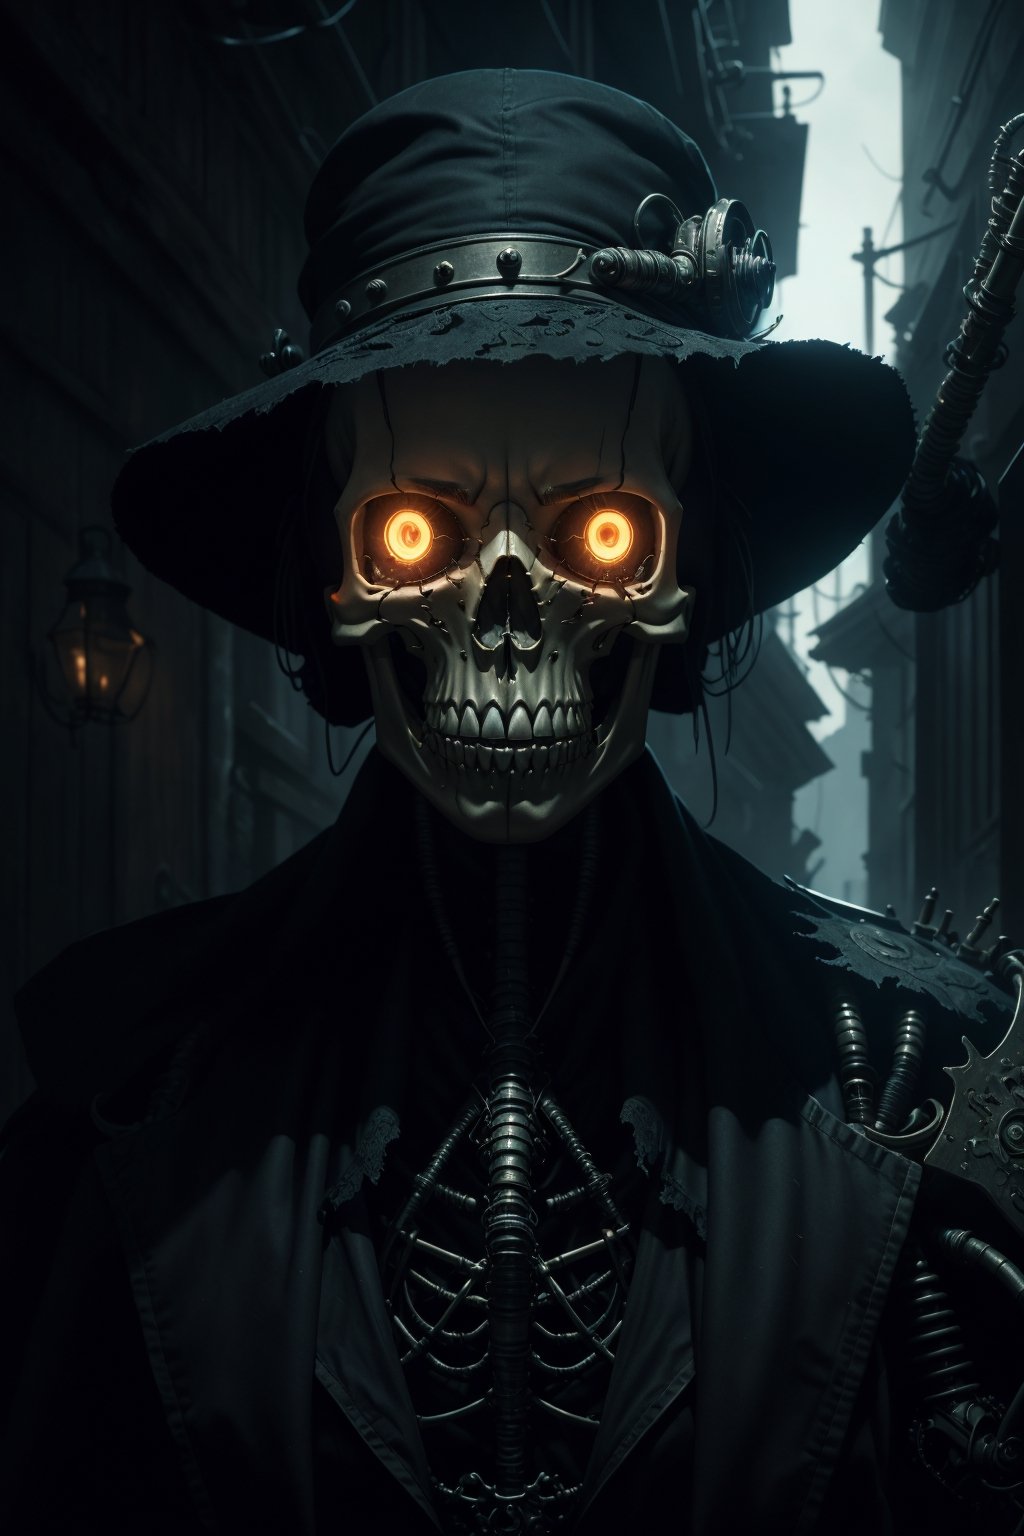 (Very detailed 8K wallpaper), A masterfully detailed portrait of a sinister necromancer, their face shrouded in darkness, a cyborg skeleton companion lurking ominously in the shadows. The artwork is rendered in a highly detailed and dramatic steampunk fantasy style, featuring a retro-futuristic female robot with intricate design elements.